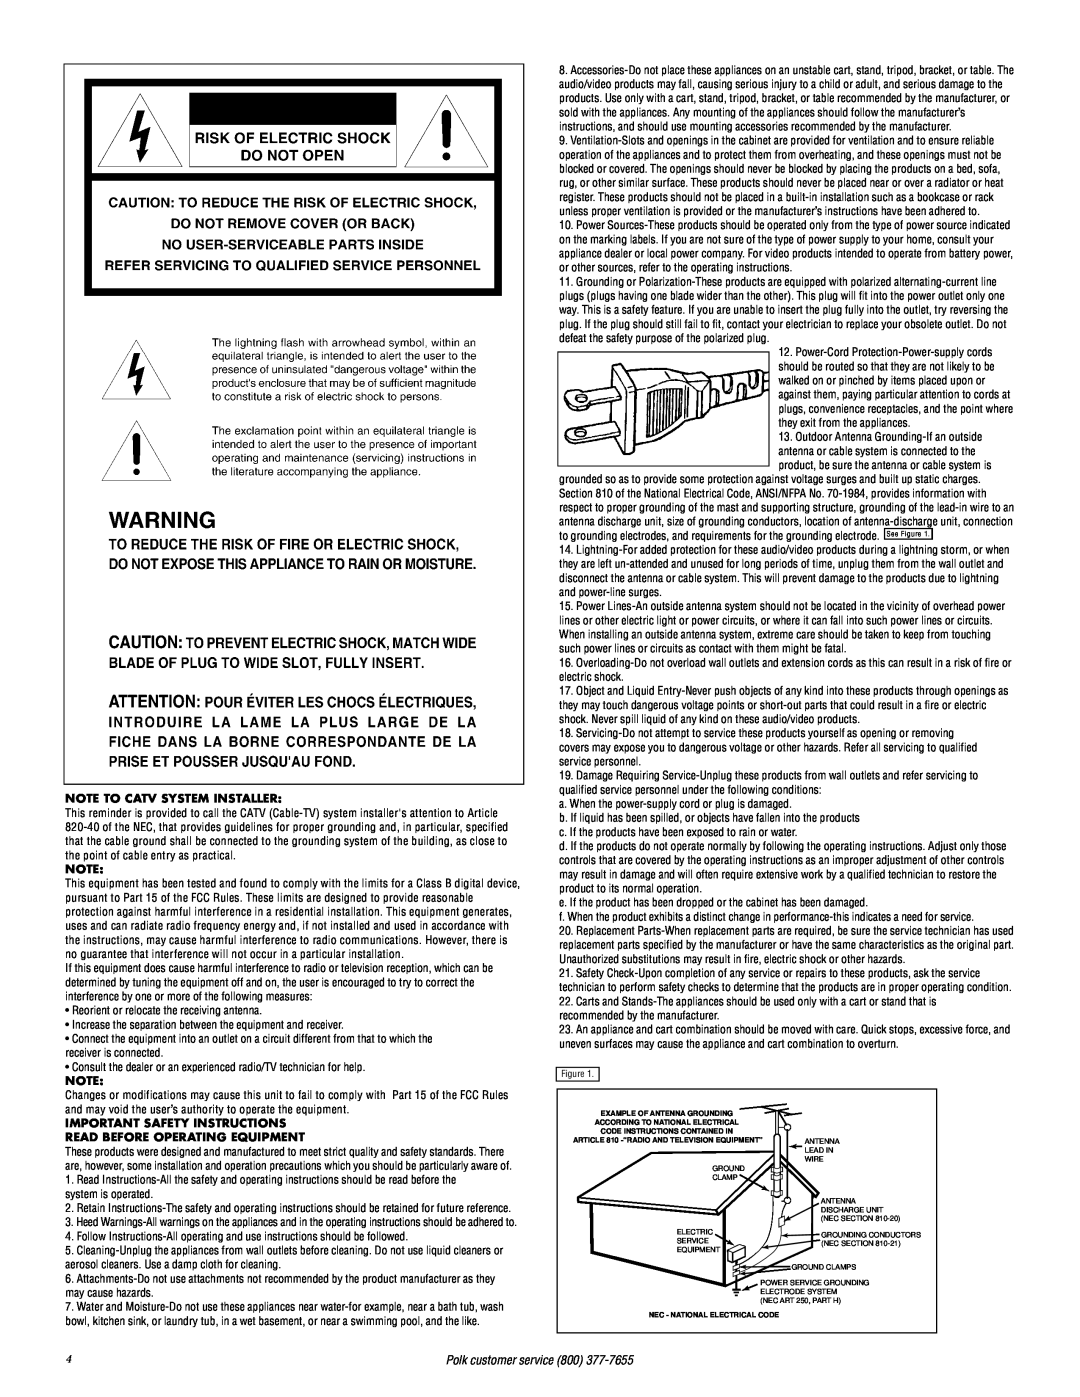 Polk Audio RMDS-1 Note To Catv System Installer, Important Safety Instructions, Read Before Operating Equipment 